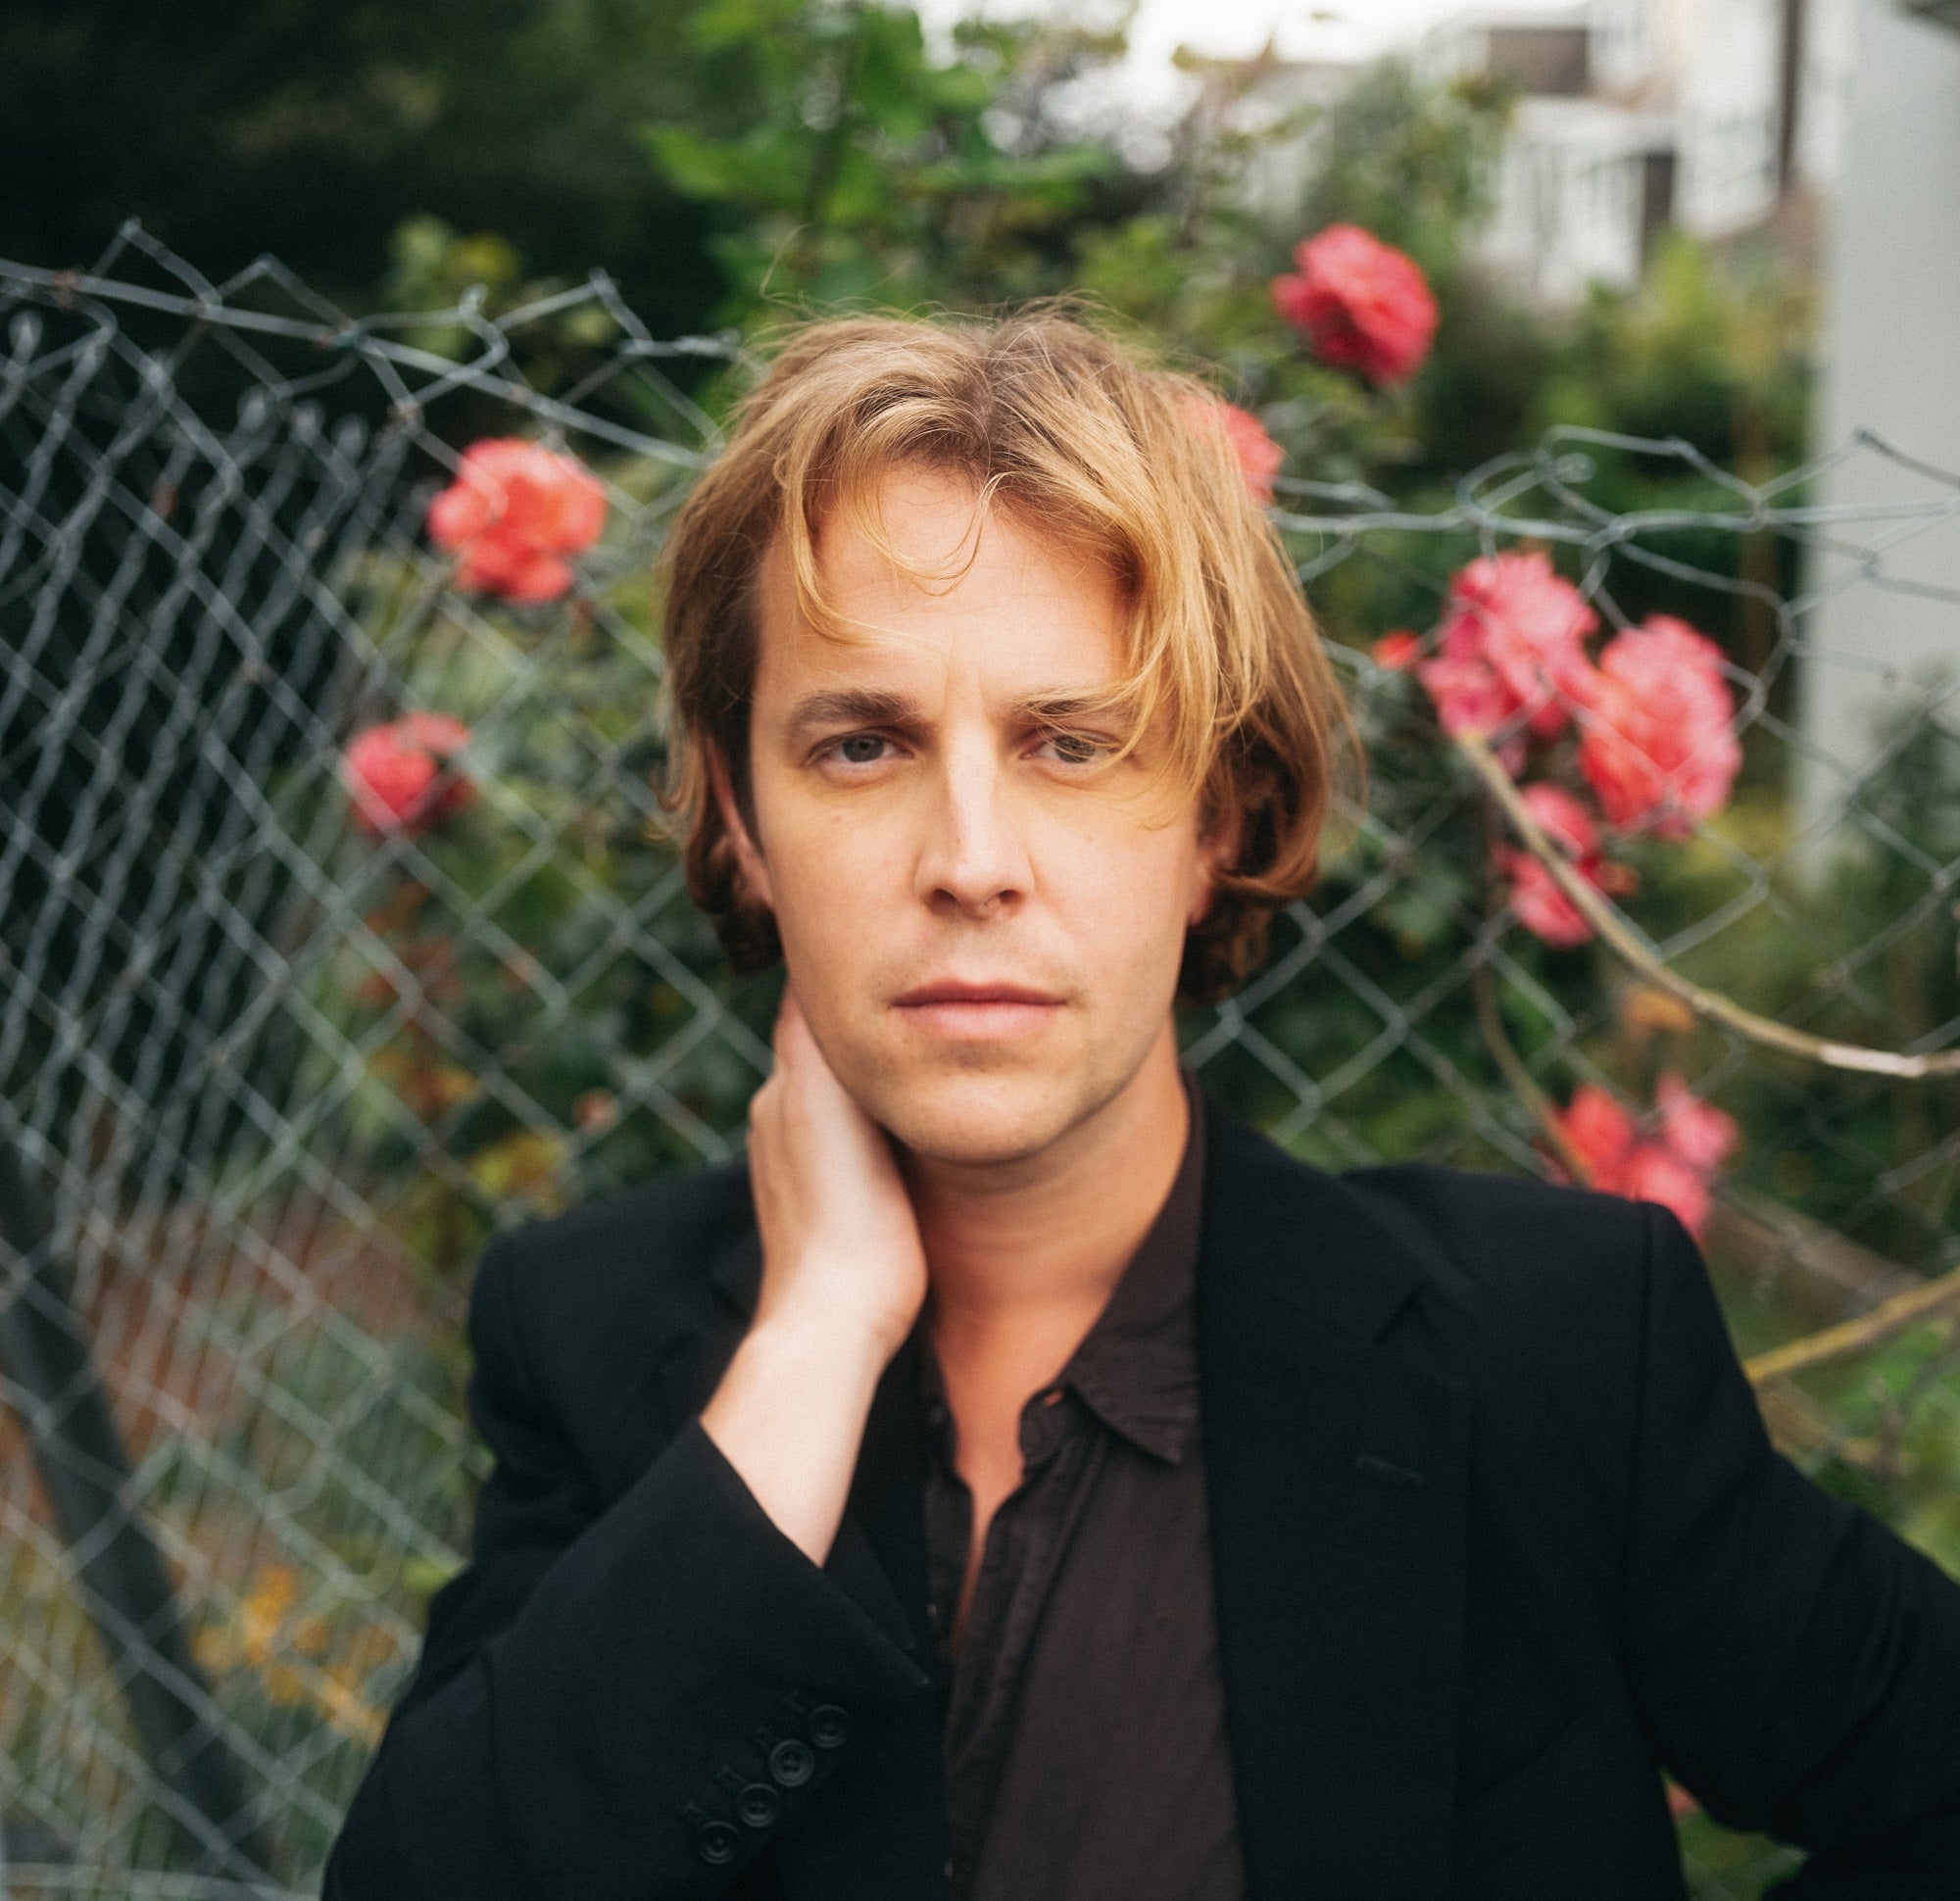 Multi-platinum-selling artist Tom Odell shares his highly anticipated new album 'Black Friday'